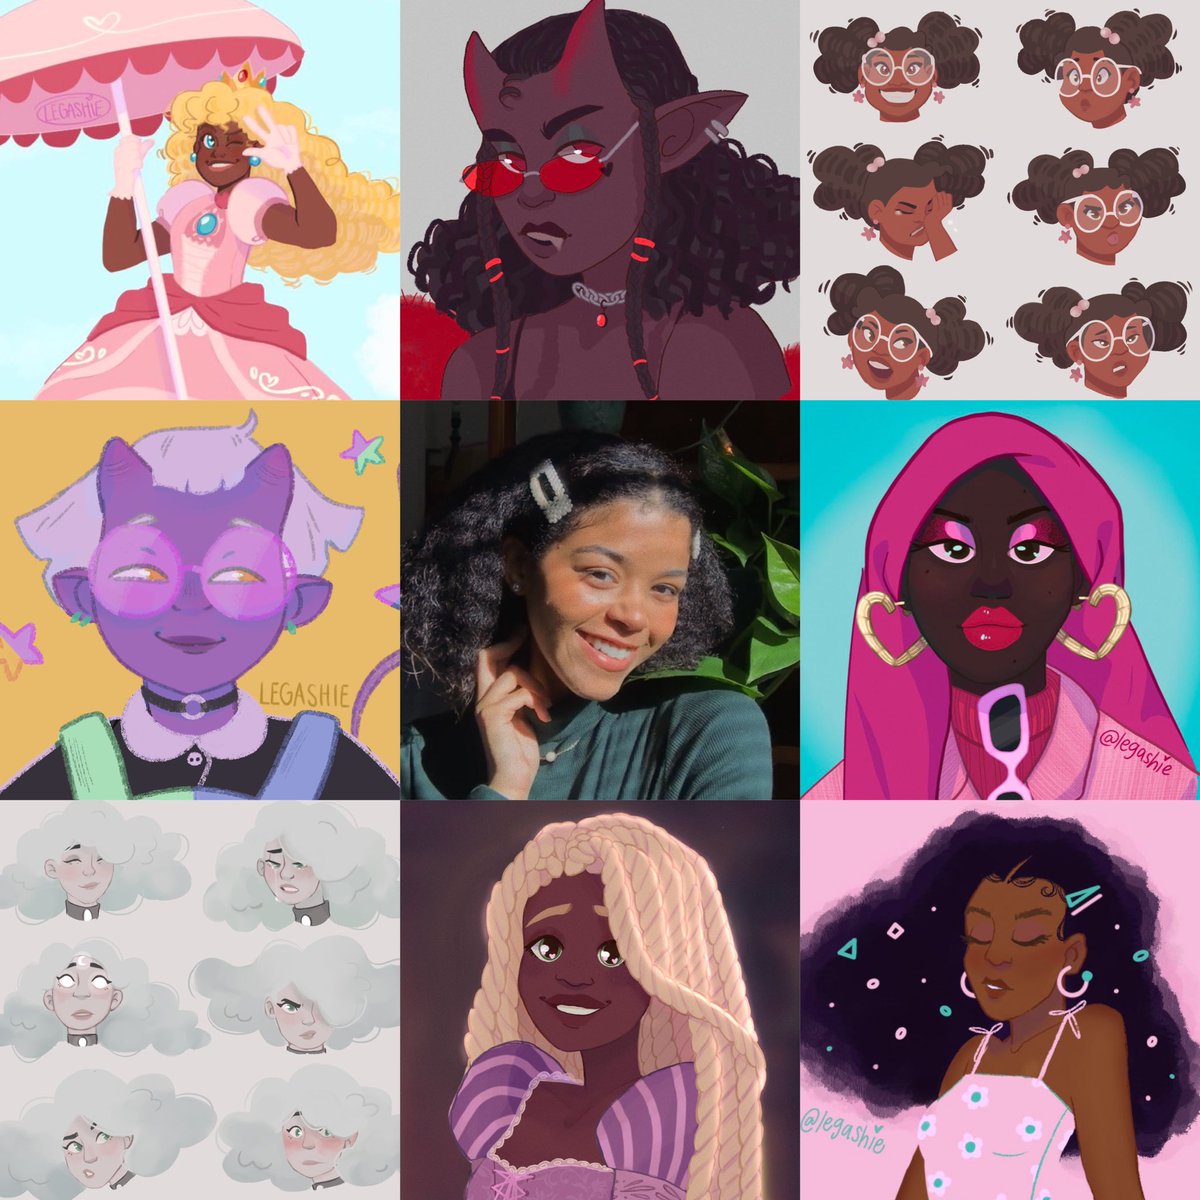 it has certainly been A Year #artvsartist2020 